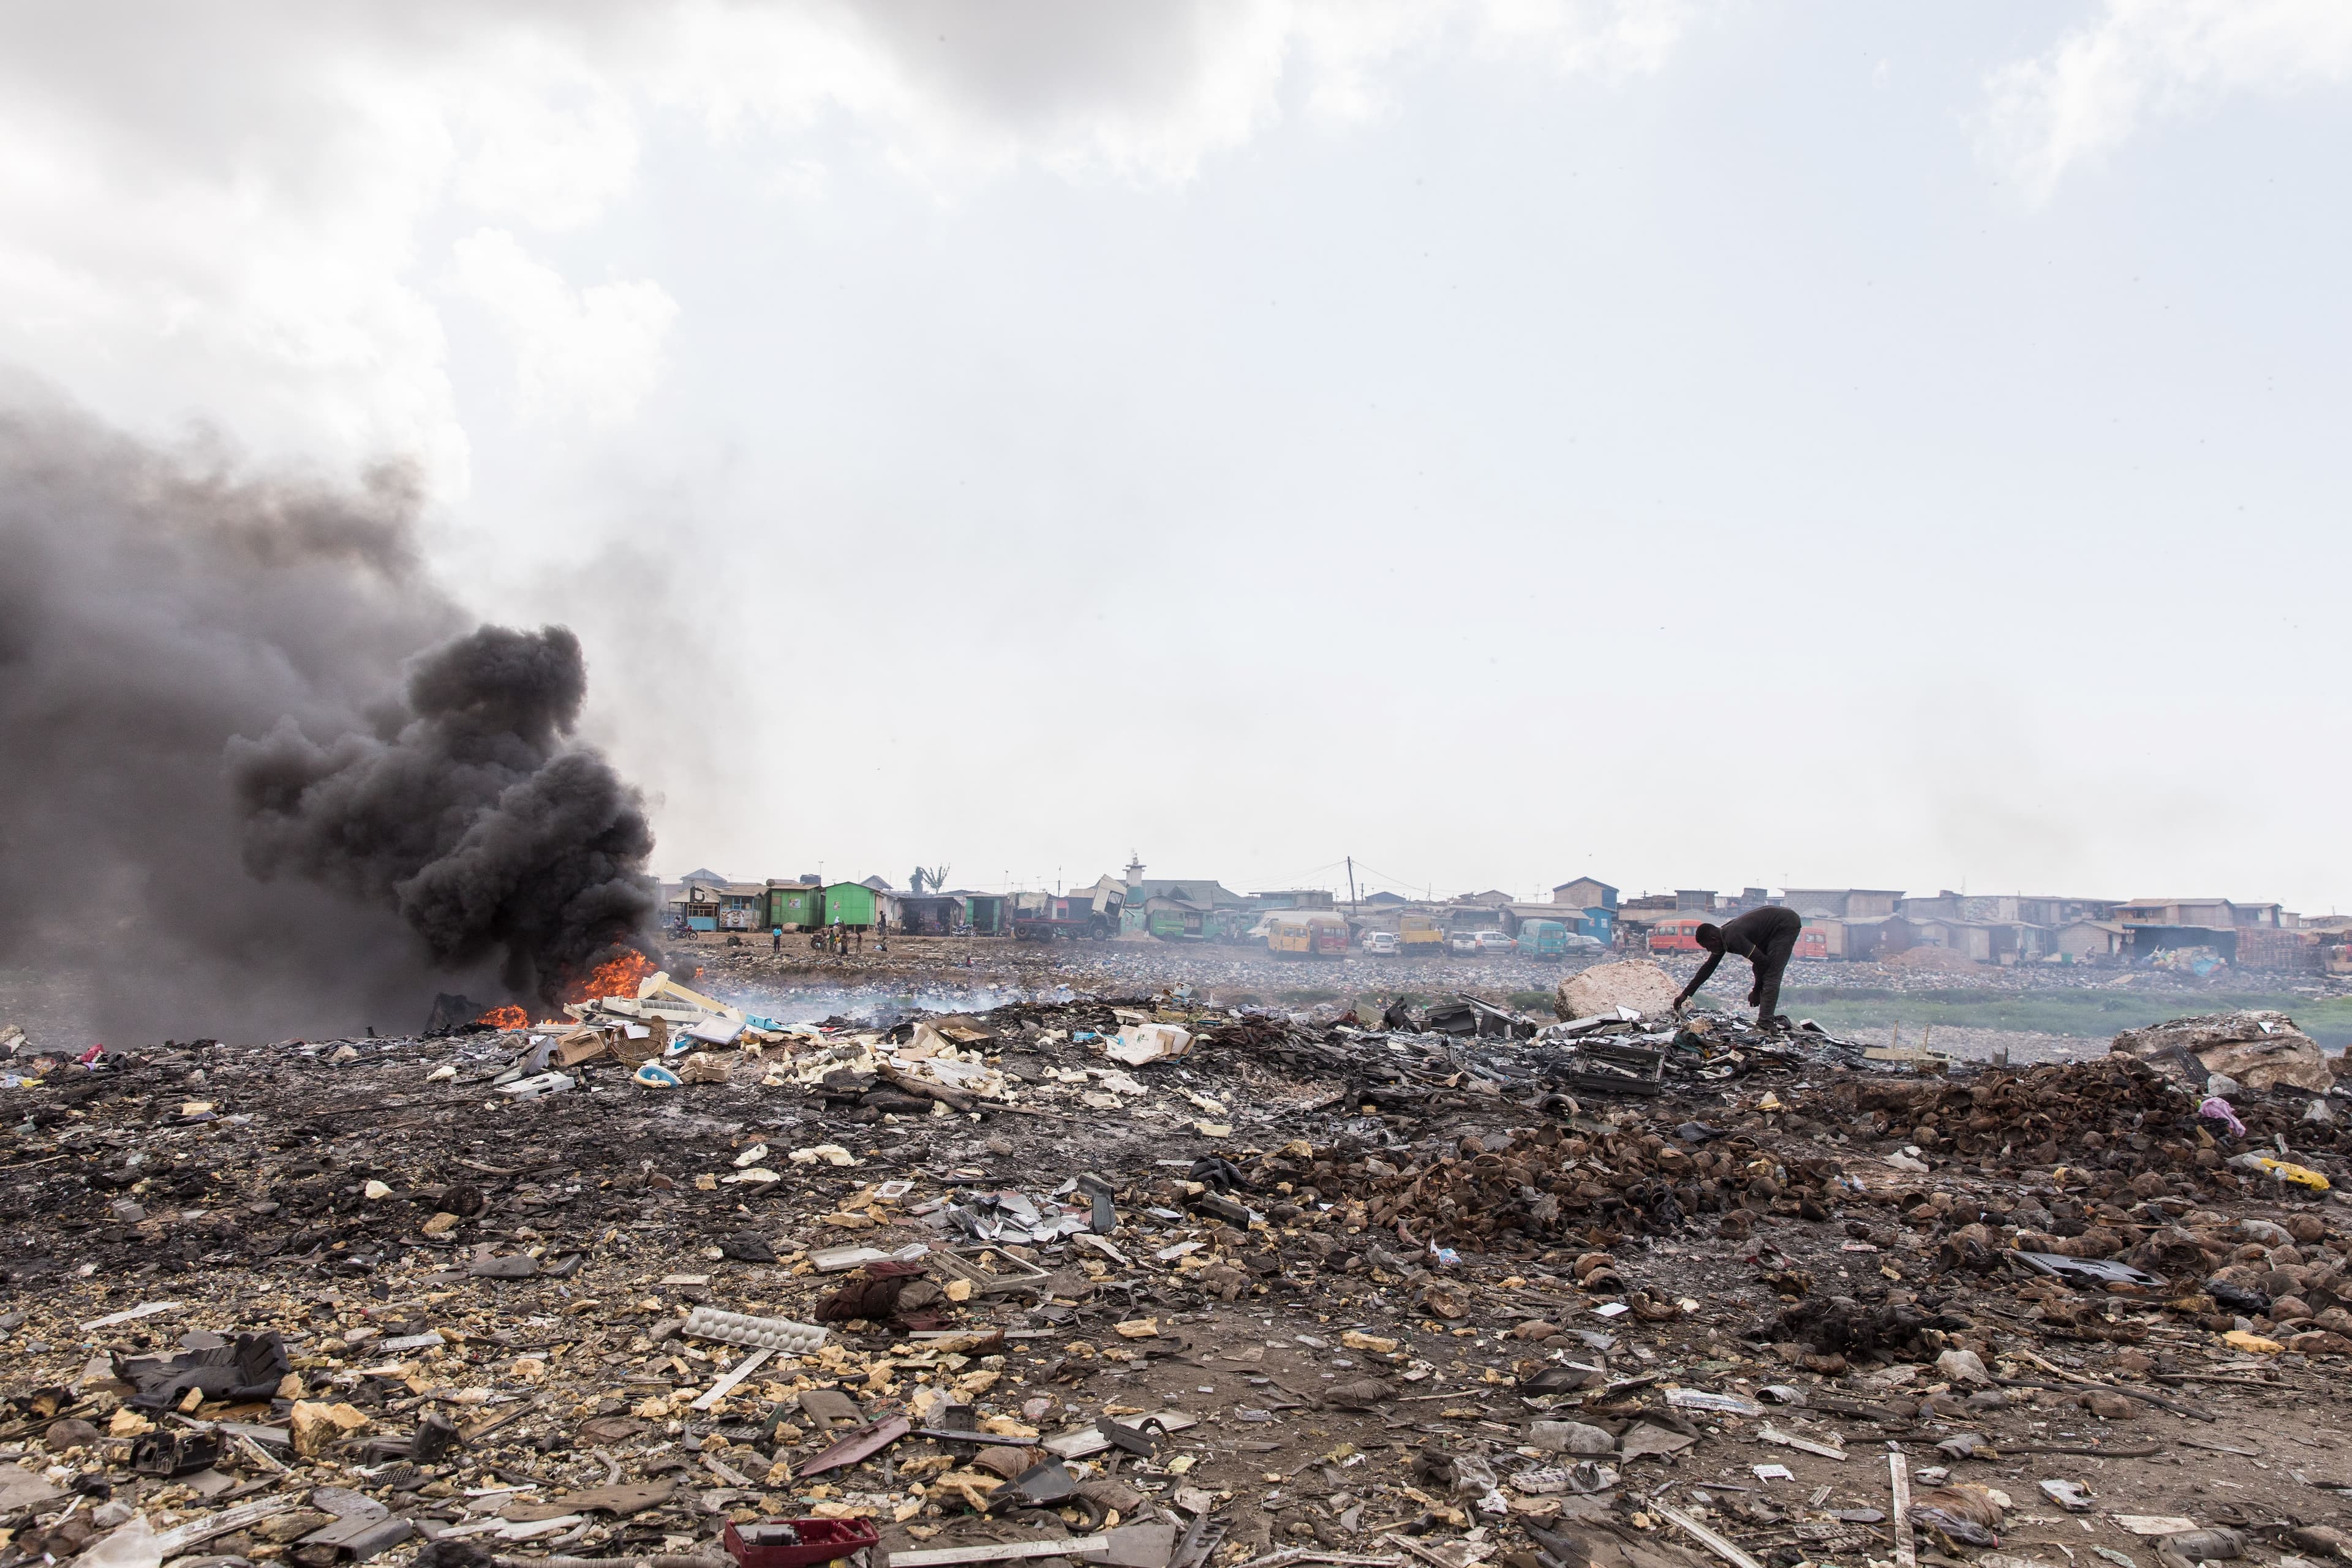 Accras' journey organisation and pollution